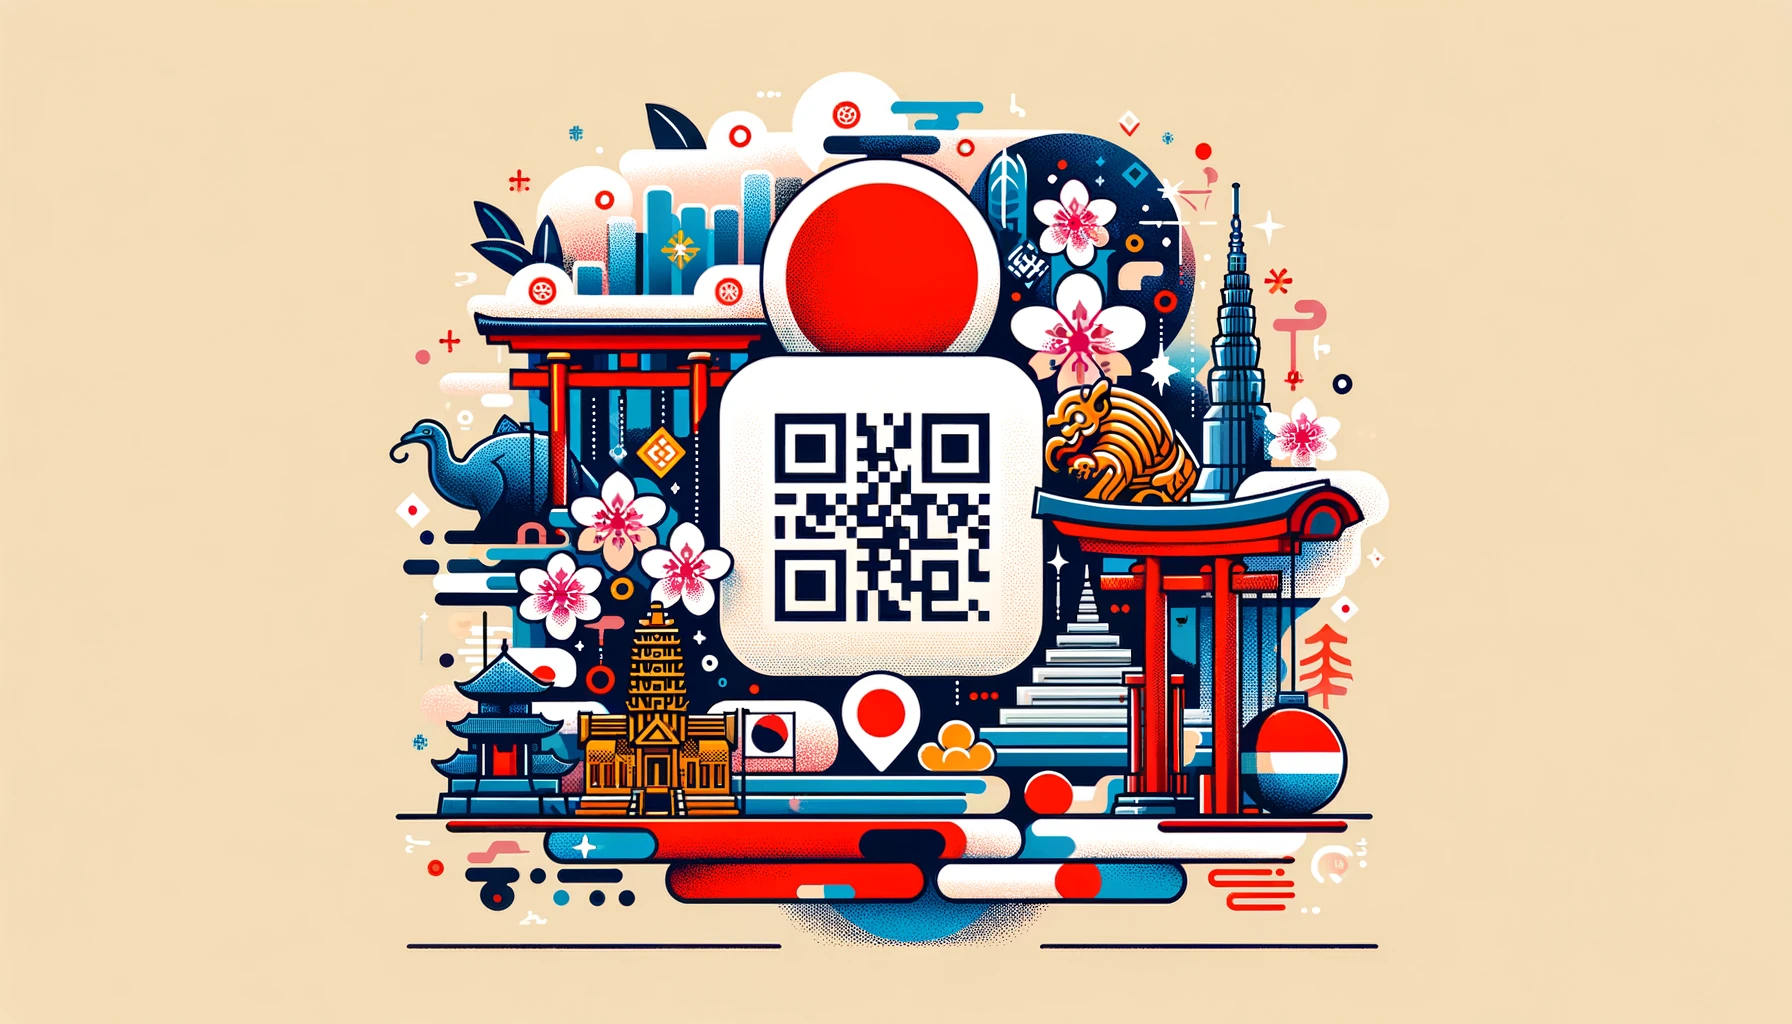 METI Proudly Confirms Japan and ASEAN to Unify QR Code Payment Systems by 2025